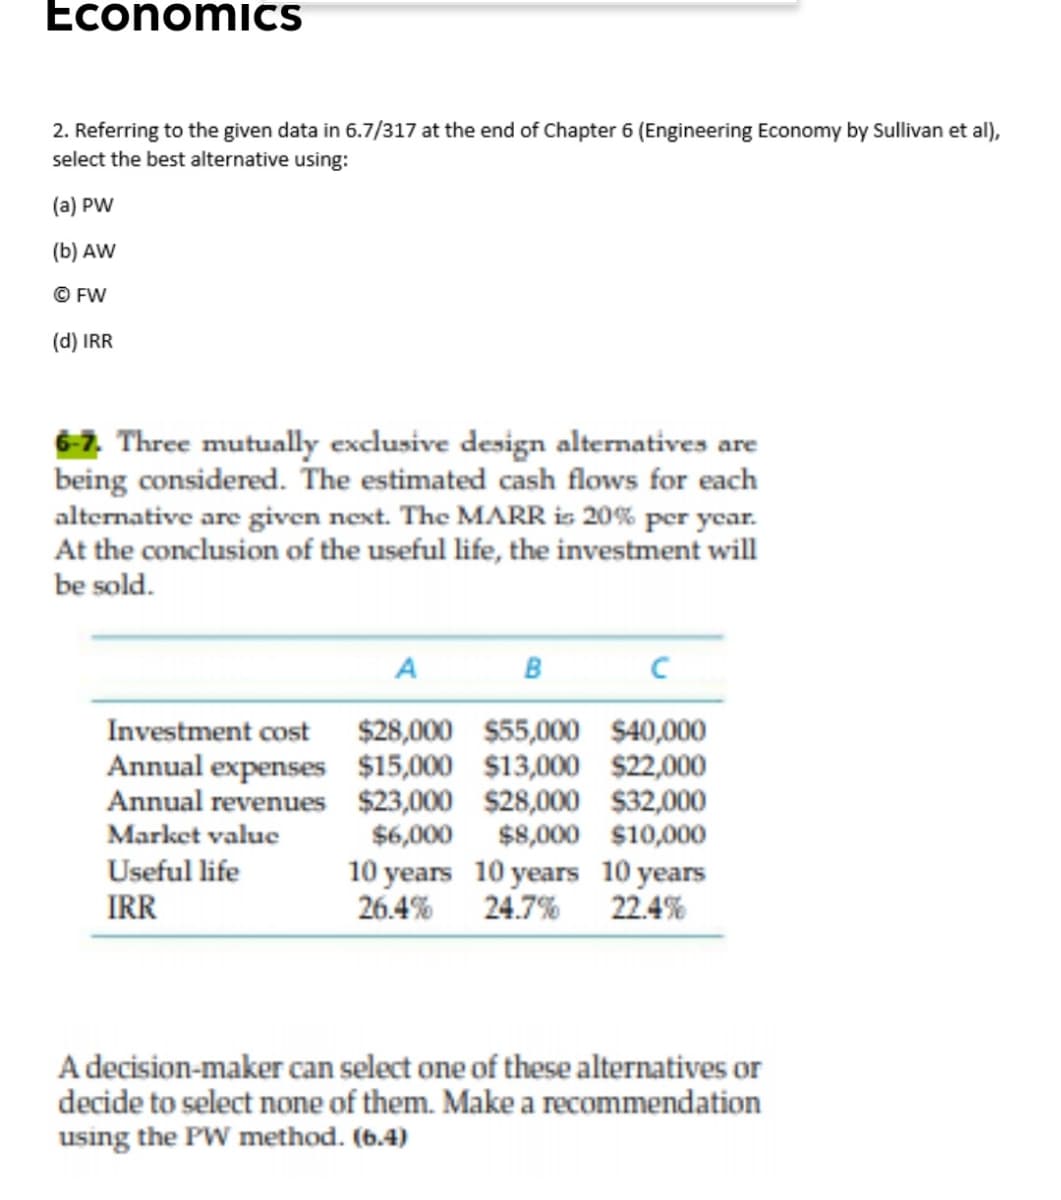 EconomicS
2. Referring to the given data in 6.7/317 at the end of Chapter 6 (Engineering Economy by Sullivan et al),
select the best alternative using:
(a) PW
(b) AW
© FW
(d) IRR
6-7. Three mutually exclusive design alternatives are
being considered. The estimated cash flows for each
alternative are given next. The MARR is 20% per year.
At the conclusion of the useful life, the investment will
be sold.
A
в
$28,000 $55,000 $40,000
Annual expenses $15,000 $13,000 $22,000
Annual revenues $23,000 $28,000 $32,000
$6,000 $8,000 $10,000
Investment cost
Market value
Useful life
10 years 10 years 10 years
26.4% 24.7% 22.4%
IRR
A decision-maker can select one of these alternatives or
decide to select none of them. Make a recommendation
using the PW method. (6.4)
